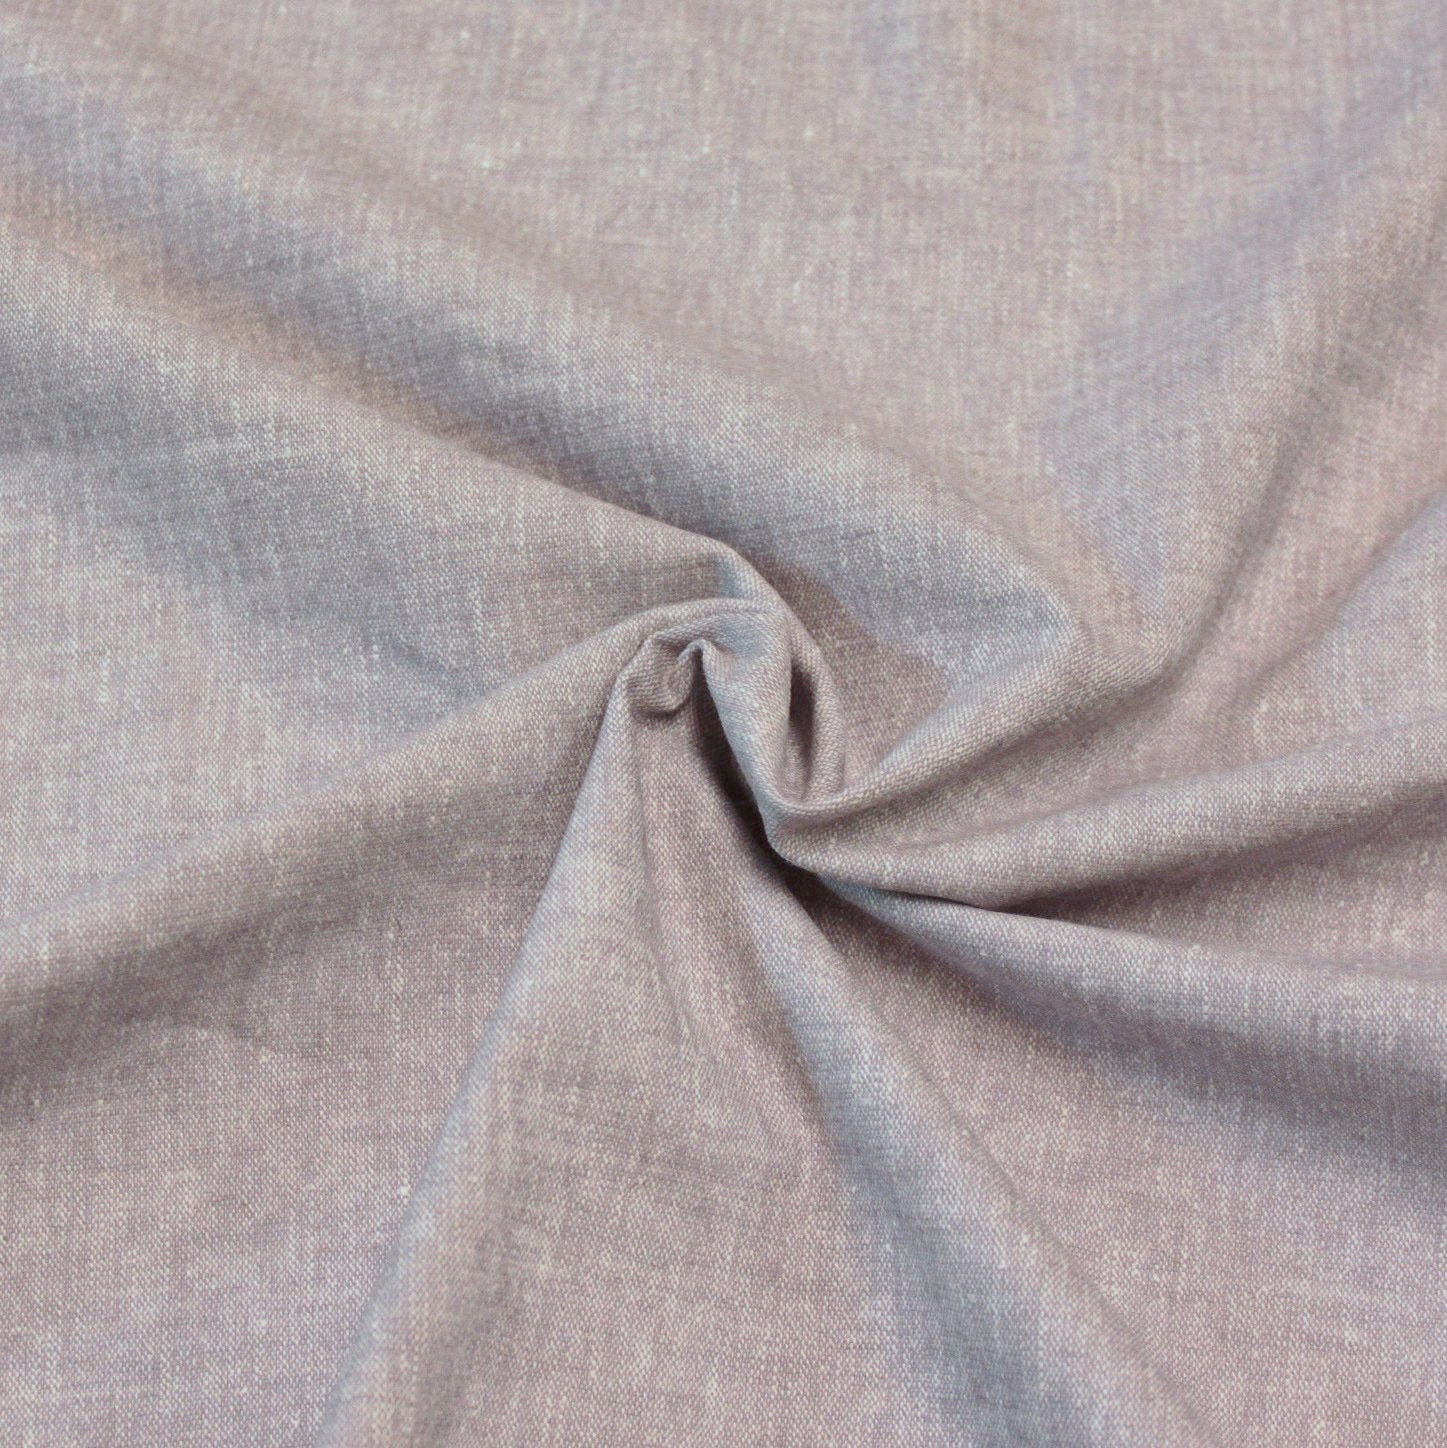 Does Linen Fabric Stretch?